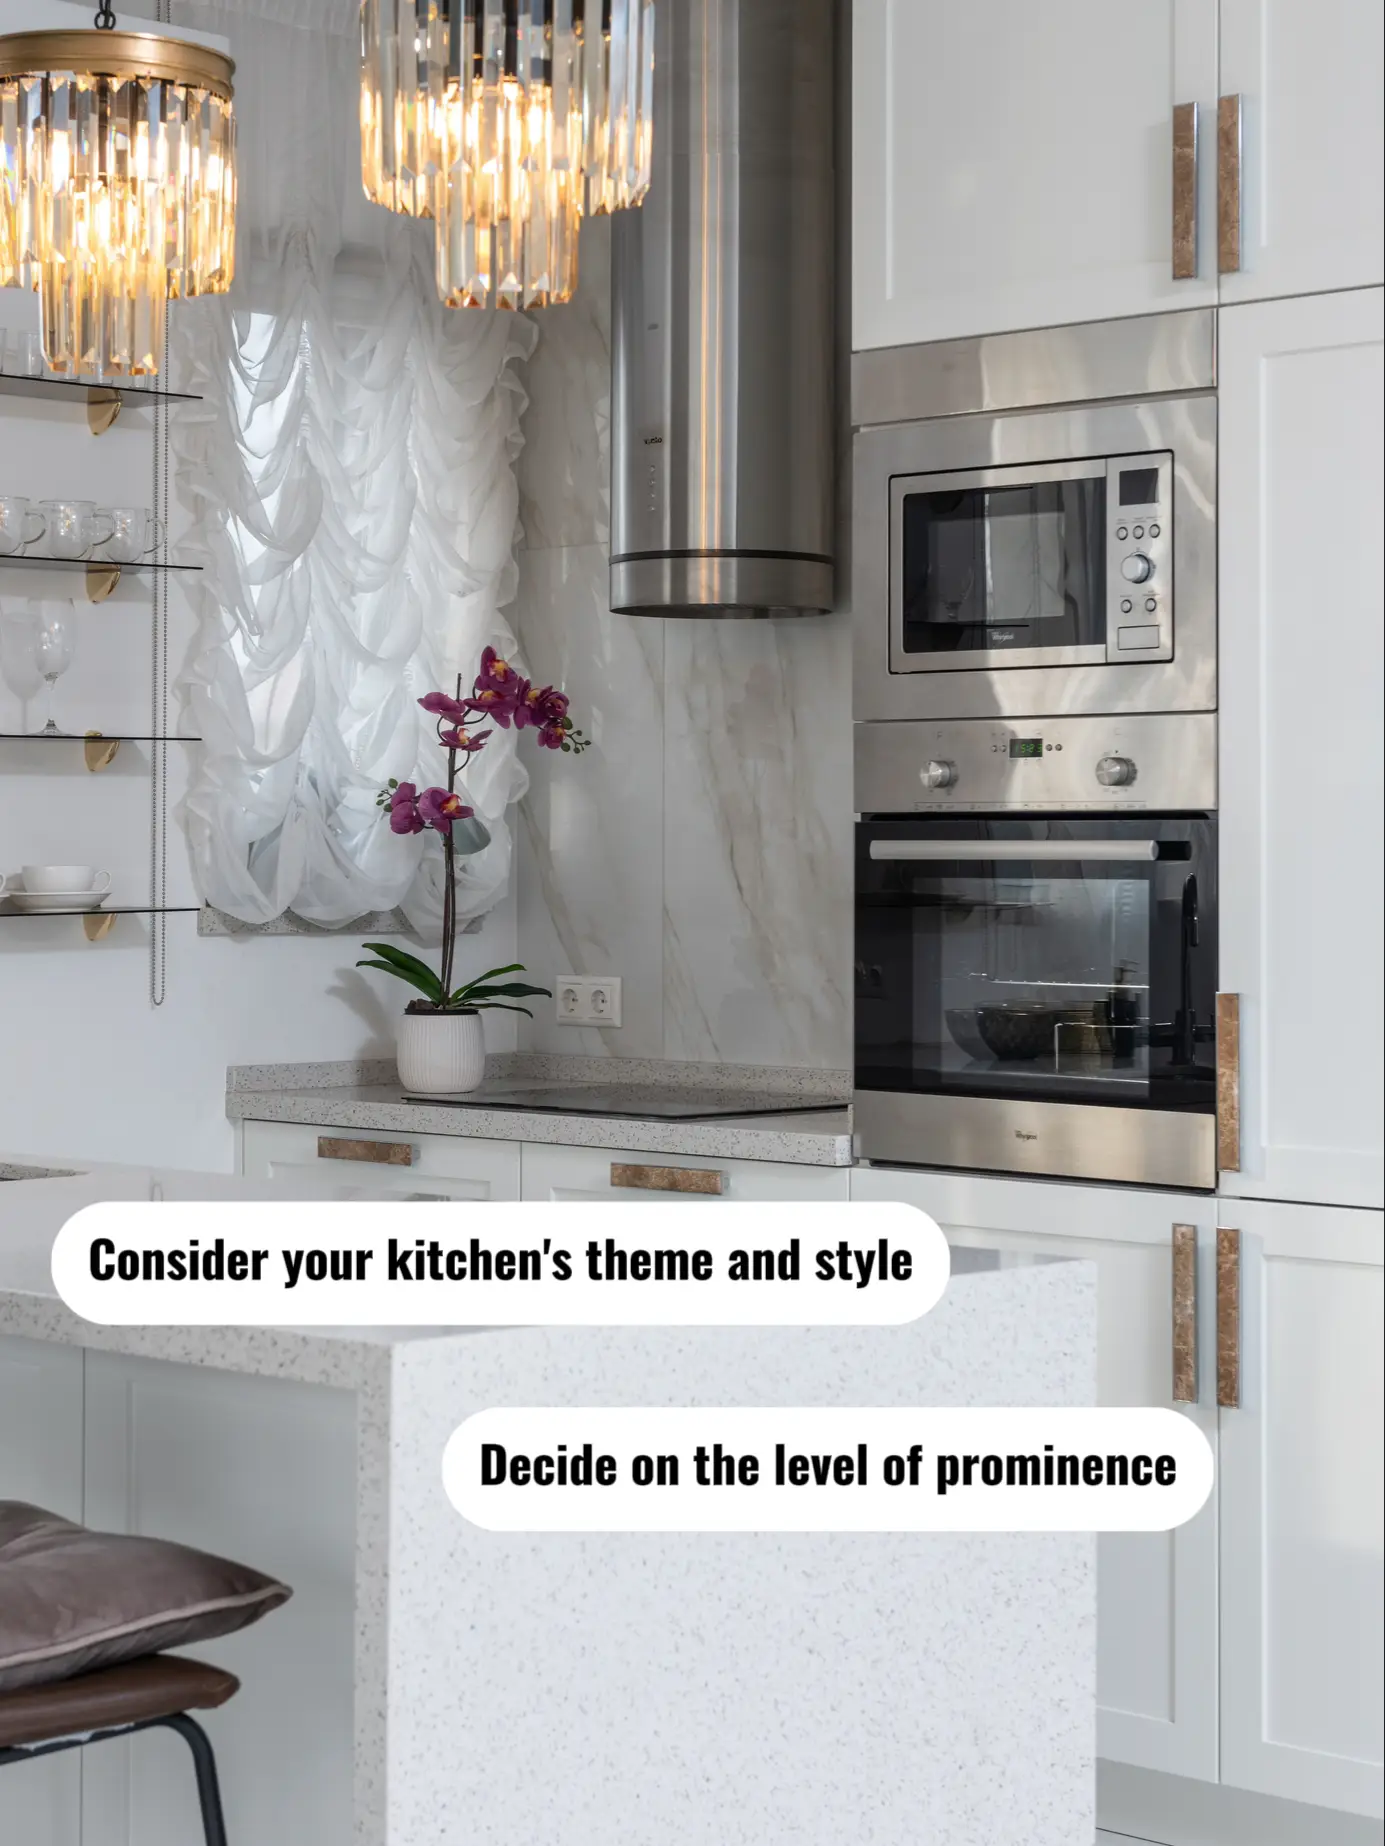 Appliance Colors: How to Choose the Right Look for Your Home